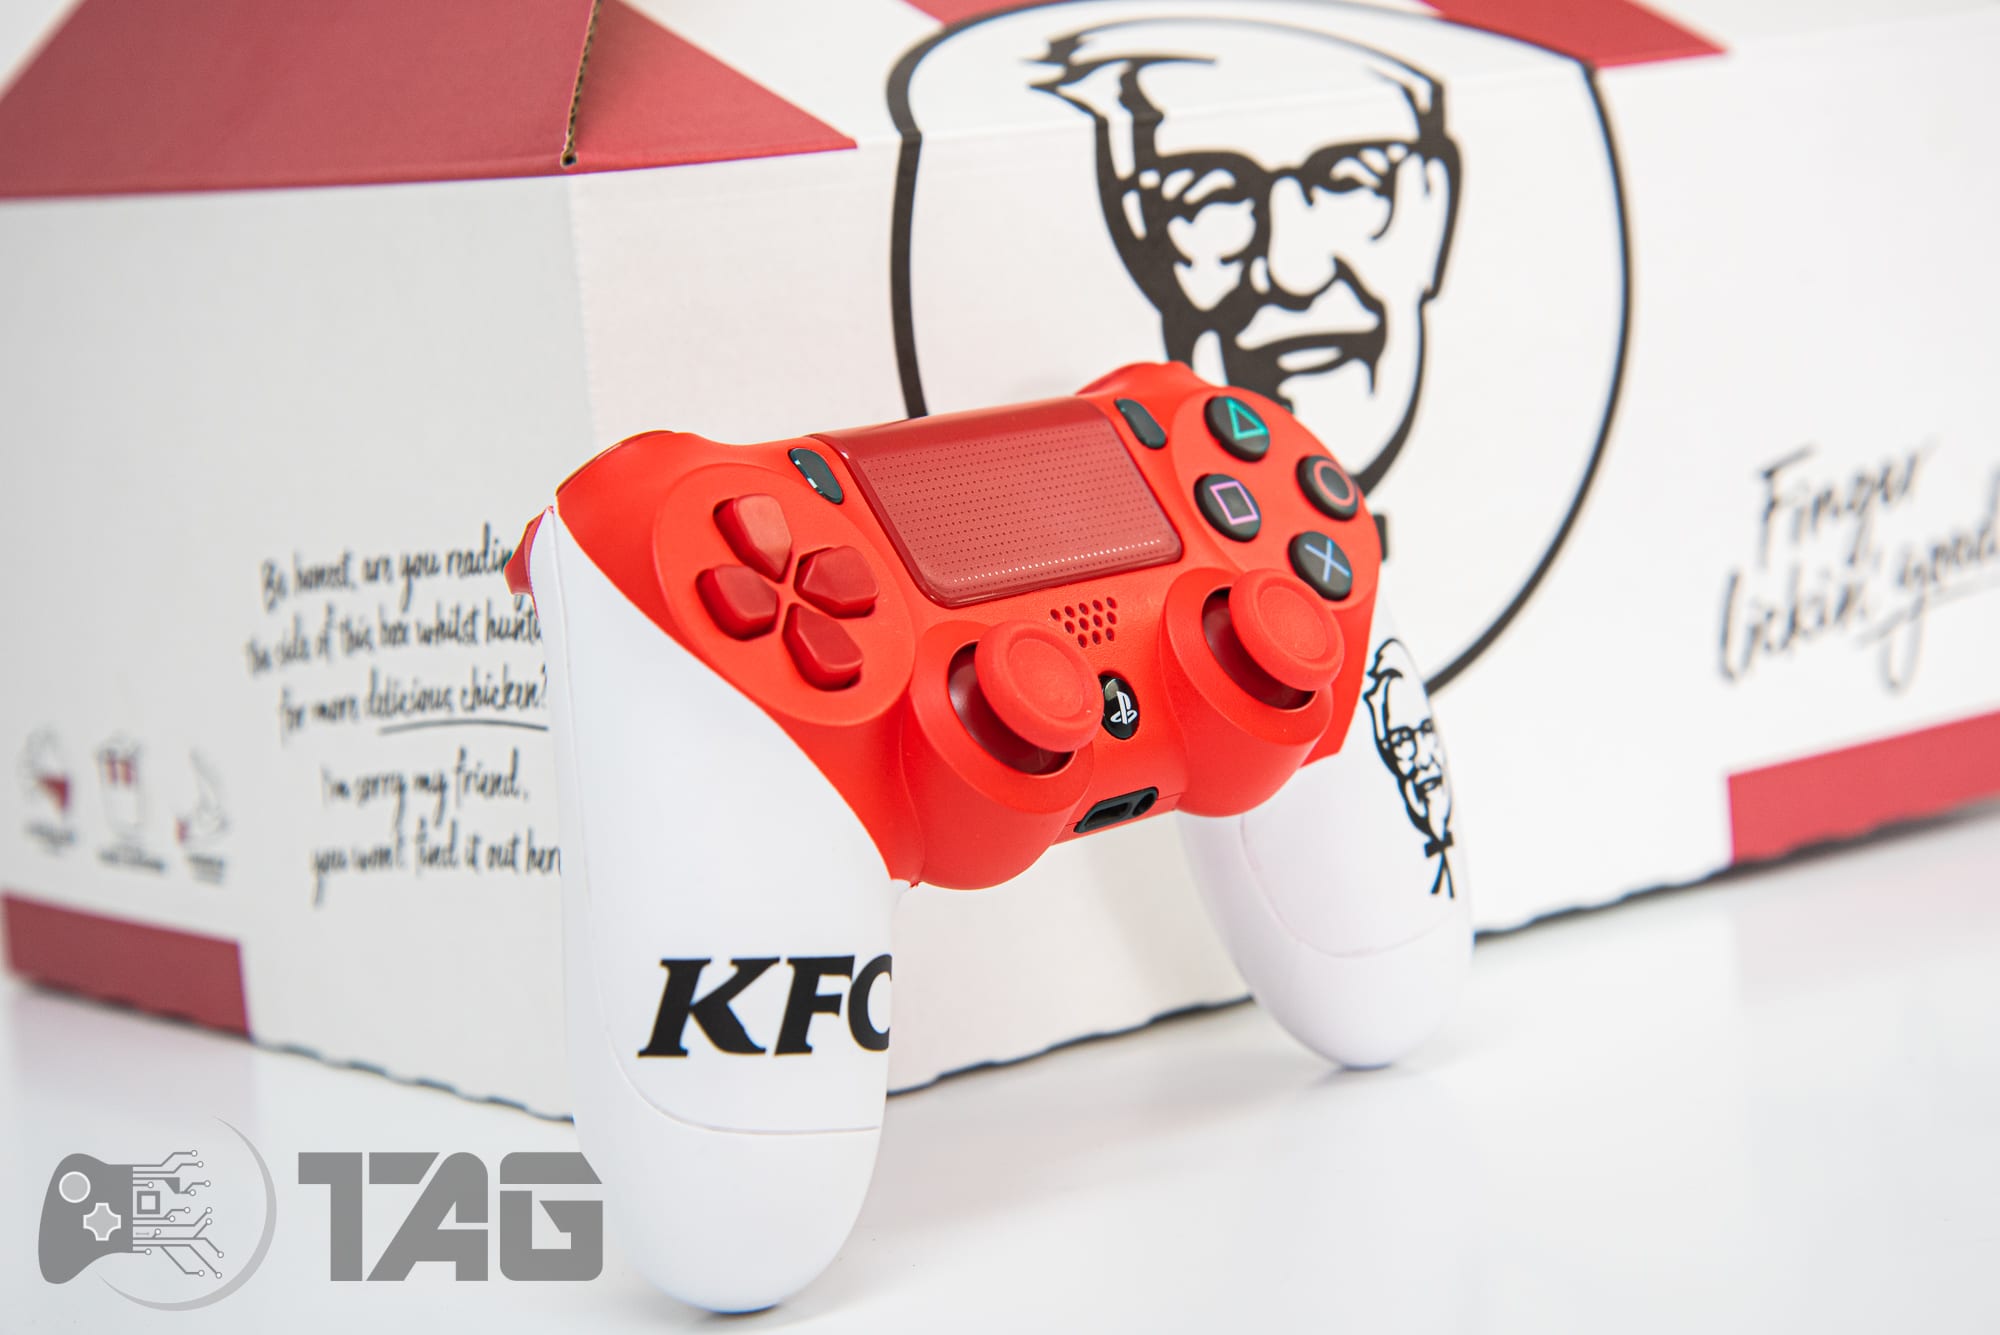 dumb video game brand collaborations - kfc ps4